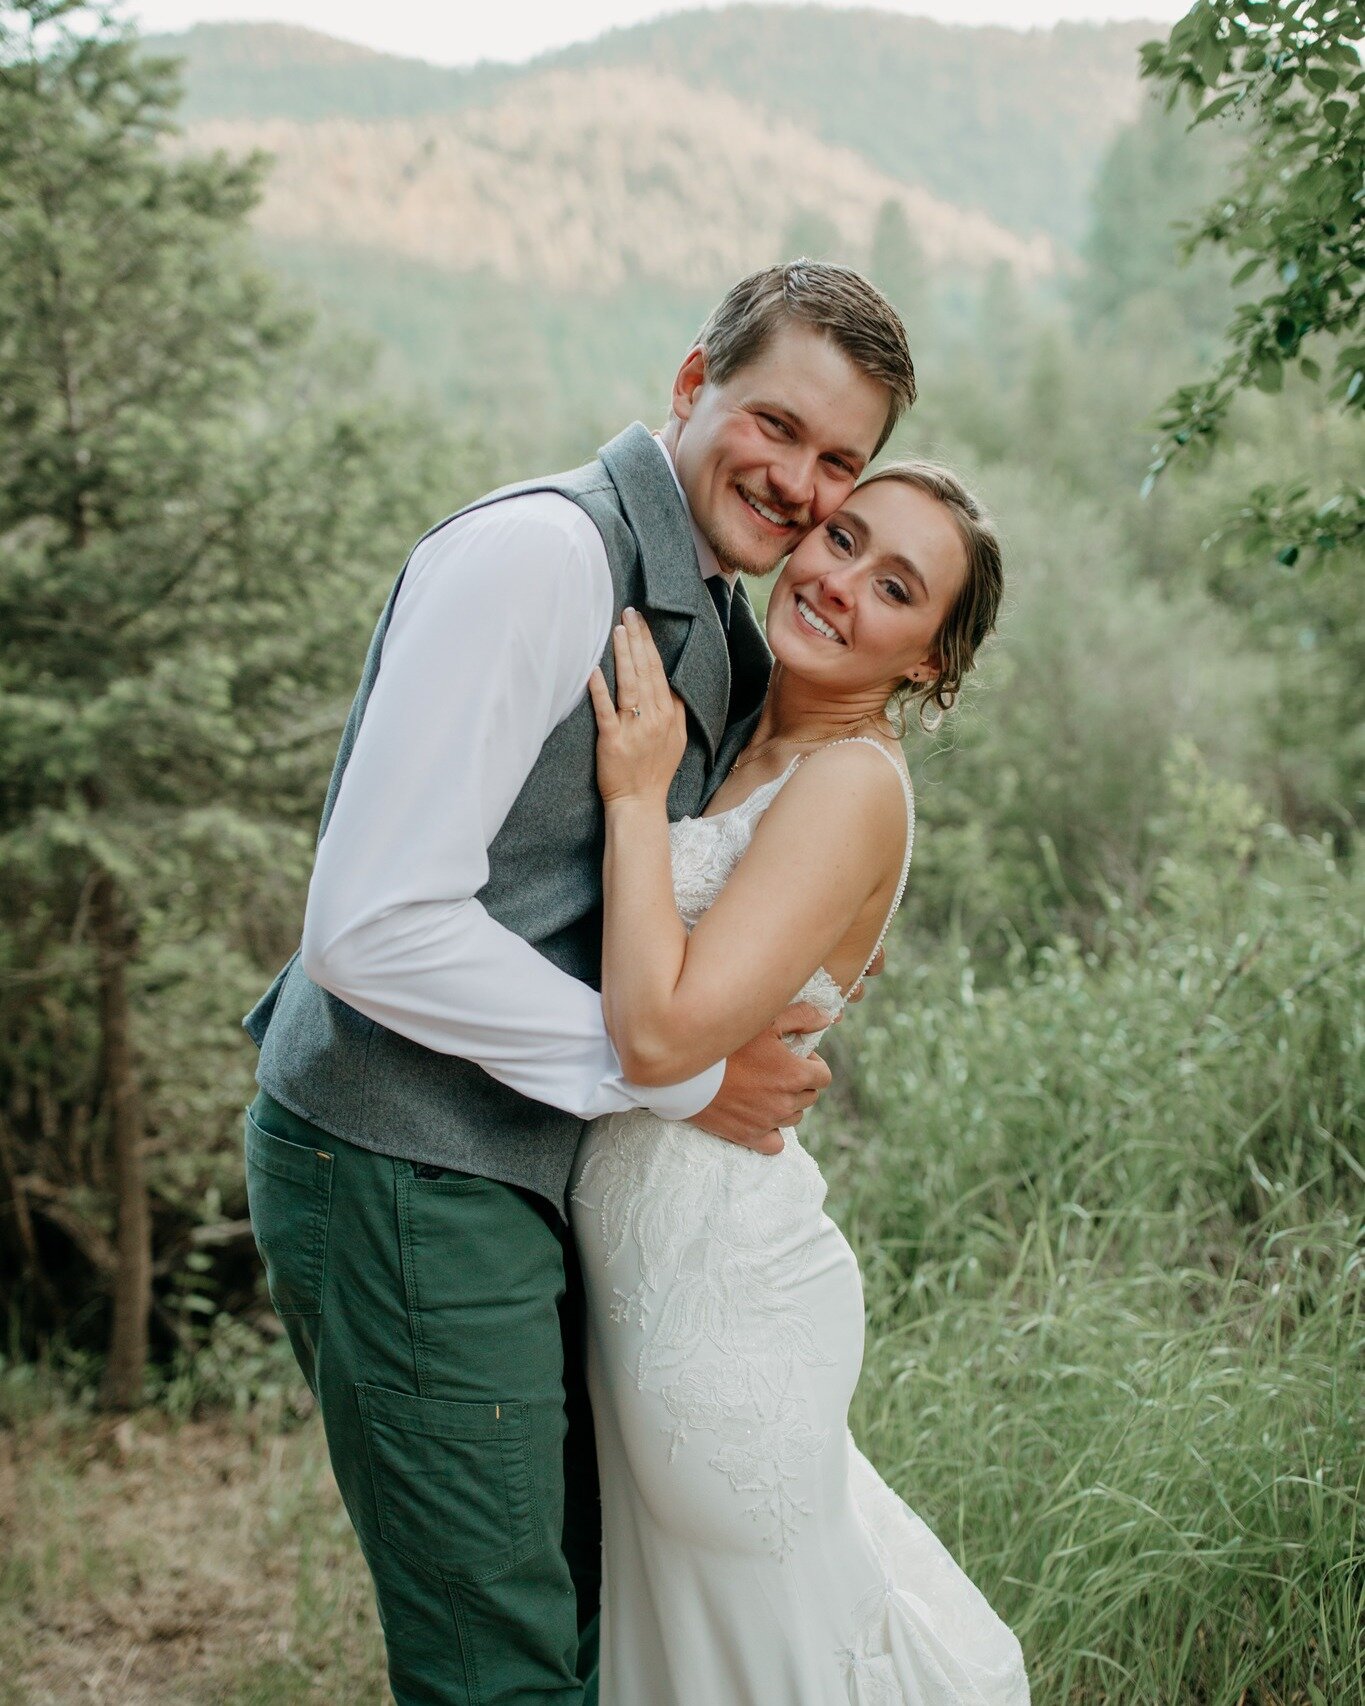 Maggie &amp; Quincy's Wedding day in York Montana was a DREAM &lt;3 Working with these two was meant to be from the get go &amp; I was so excited that it worked out the way it did &amp; I could shoot their special day - more to come of this wedding s